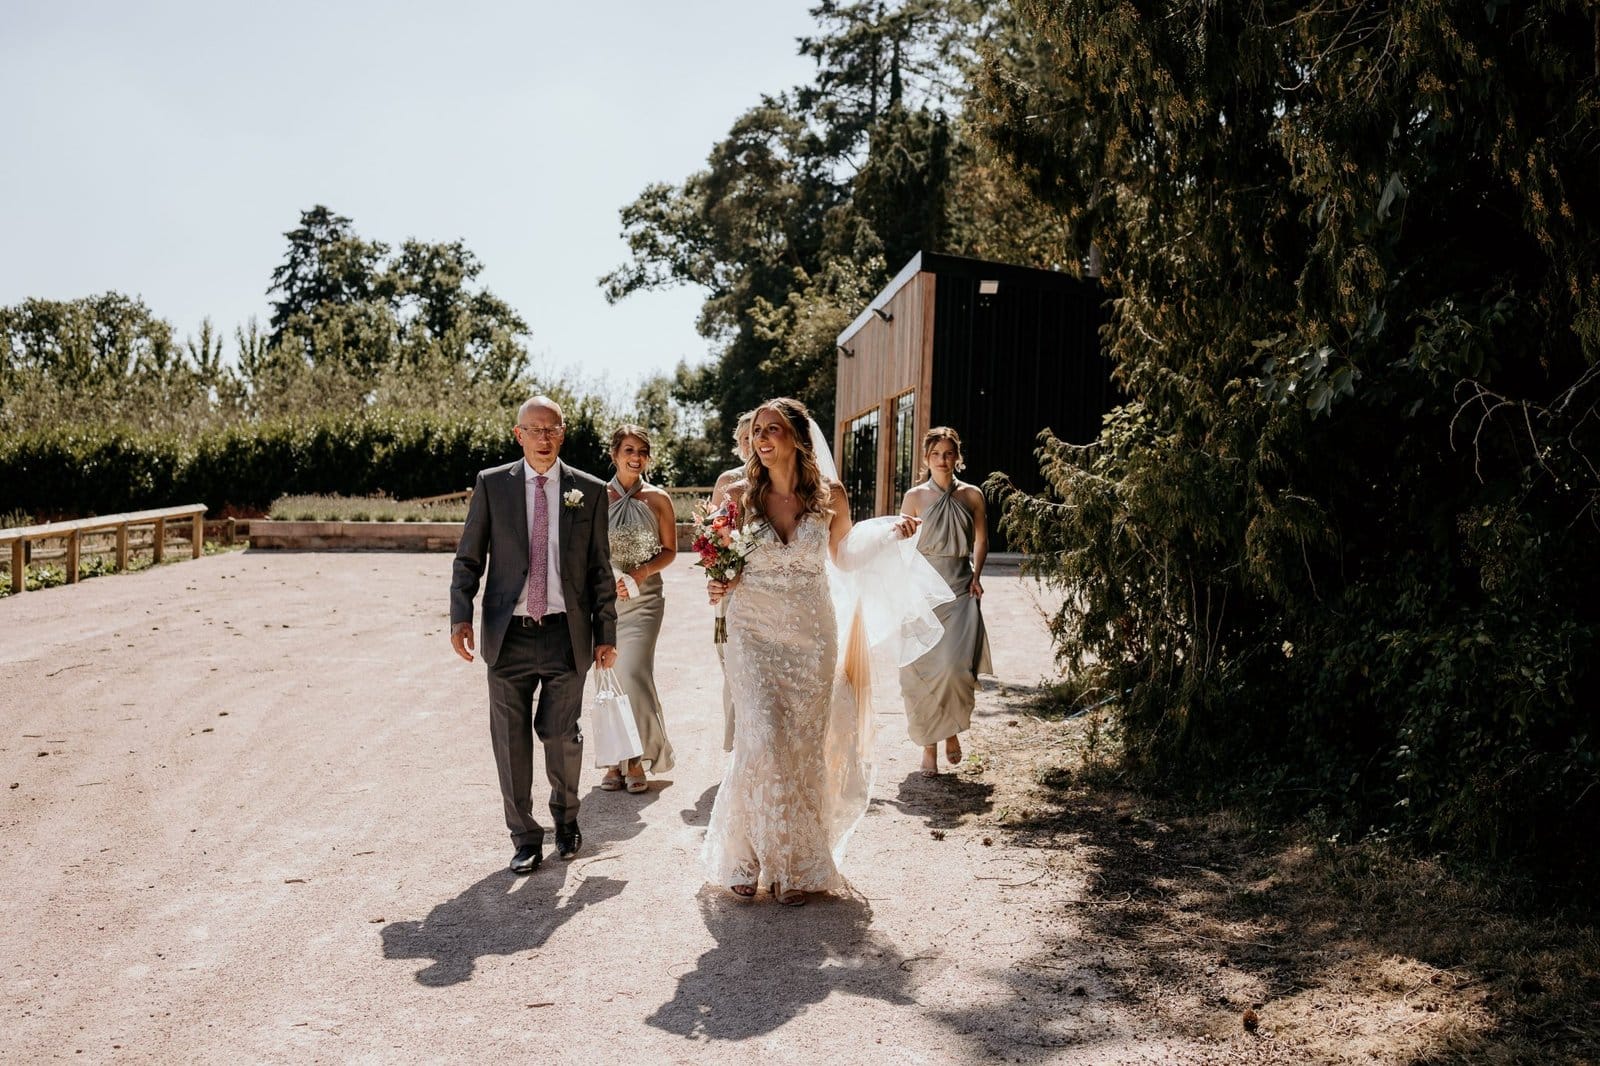 BRIDAL PARTY WALKING TO THE CEREOMONY